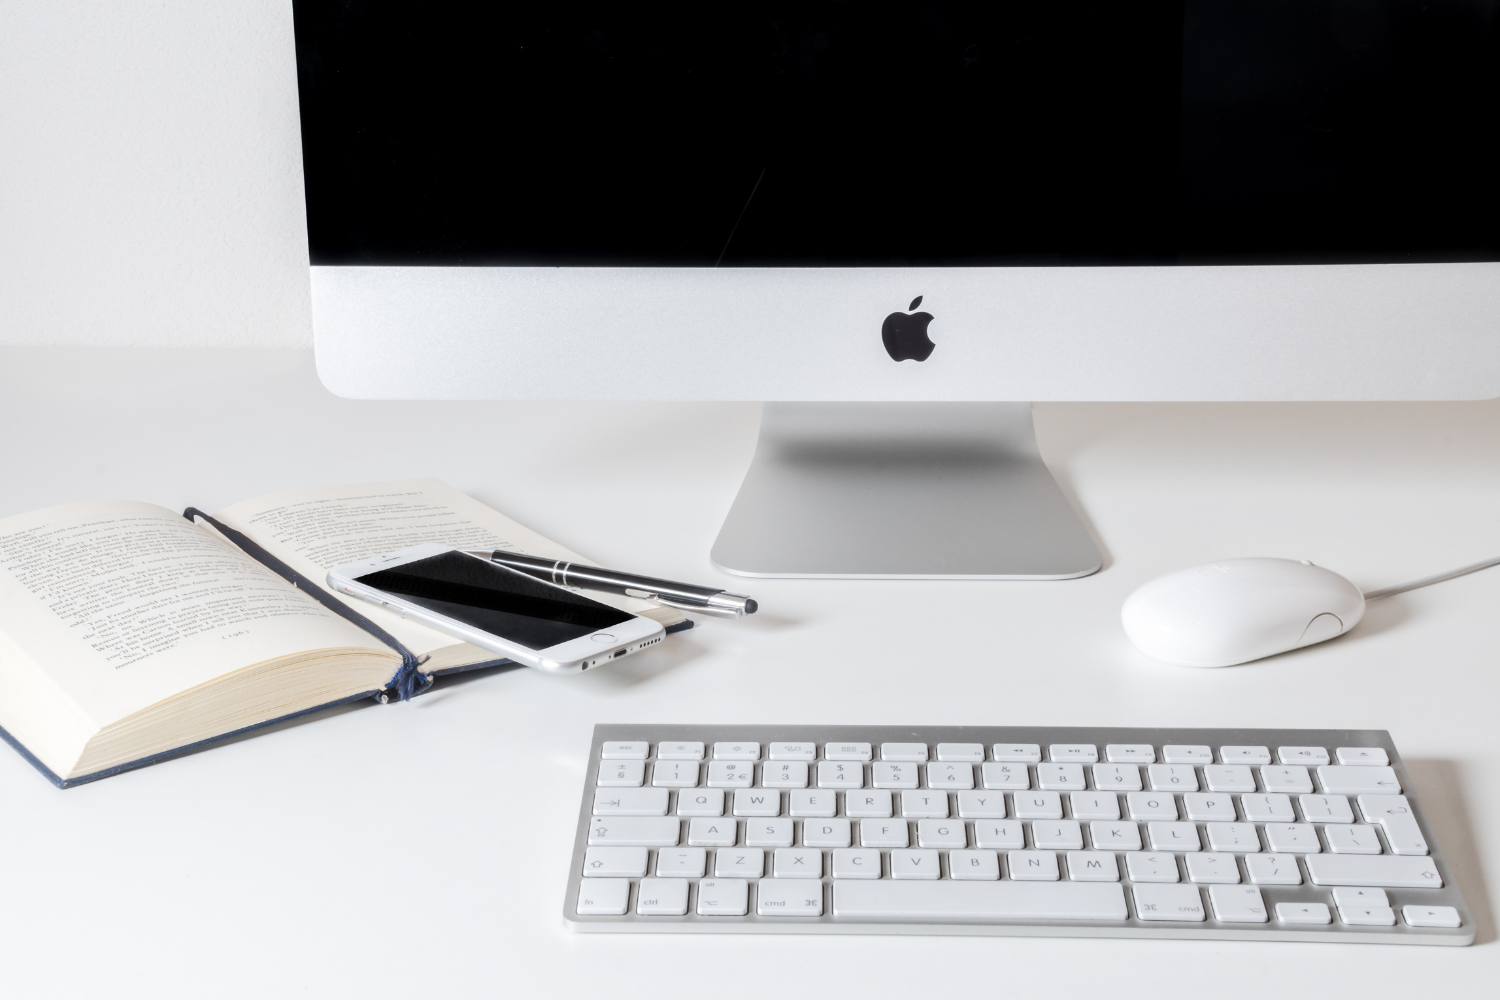 A picture of an iMac, keyboard, mouse, an iPhone sitting on a white desk. 